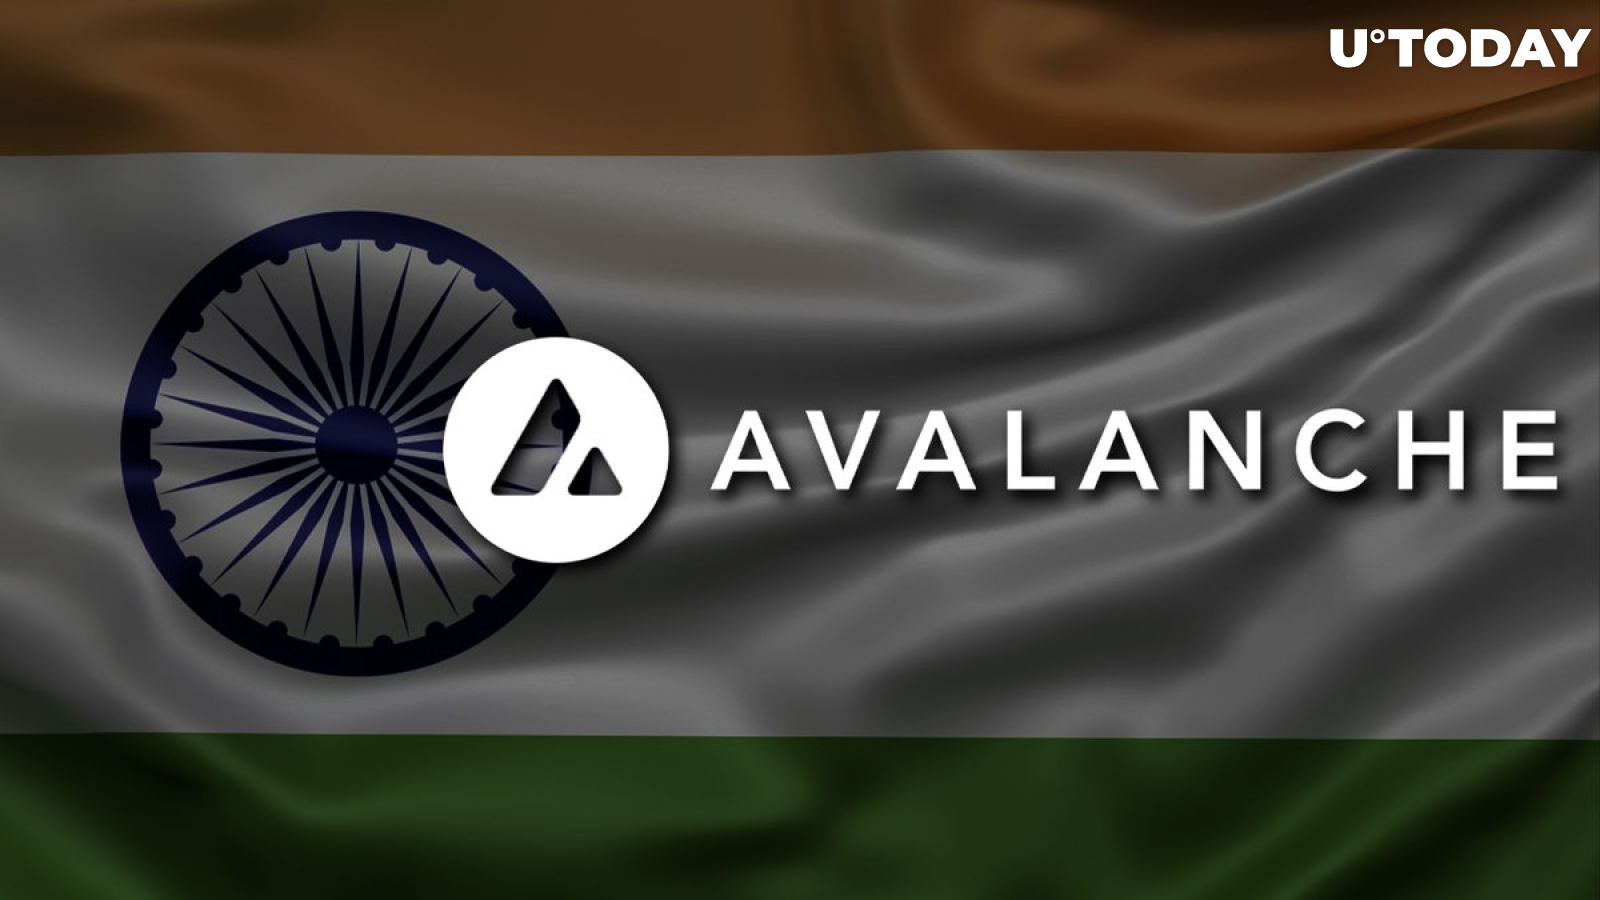 Avalanche (AVAX) Set to Onboard 50 Million More Users, Owing to This Gaming Partnership